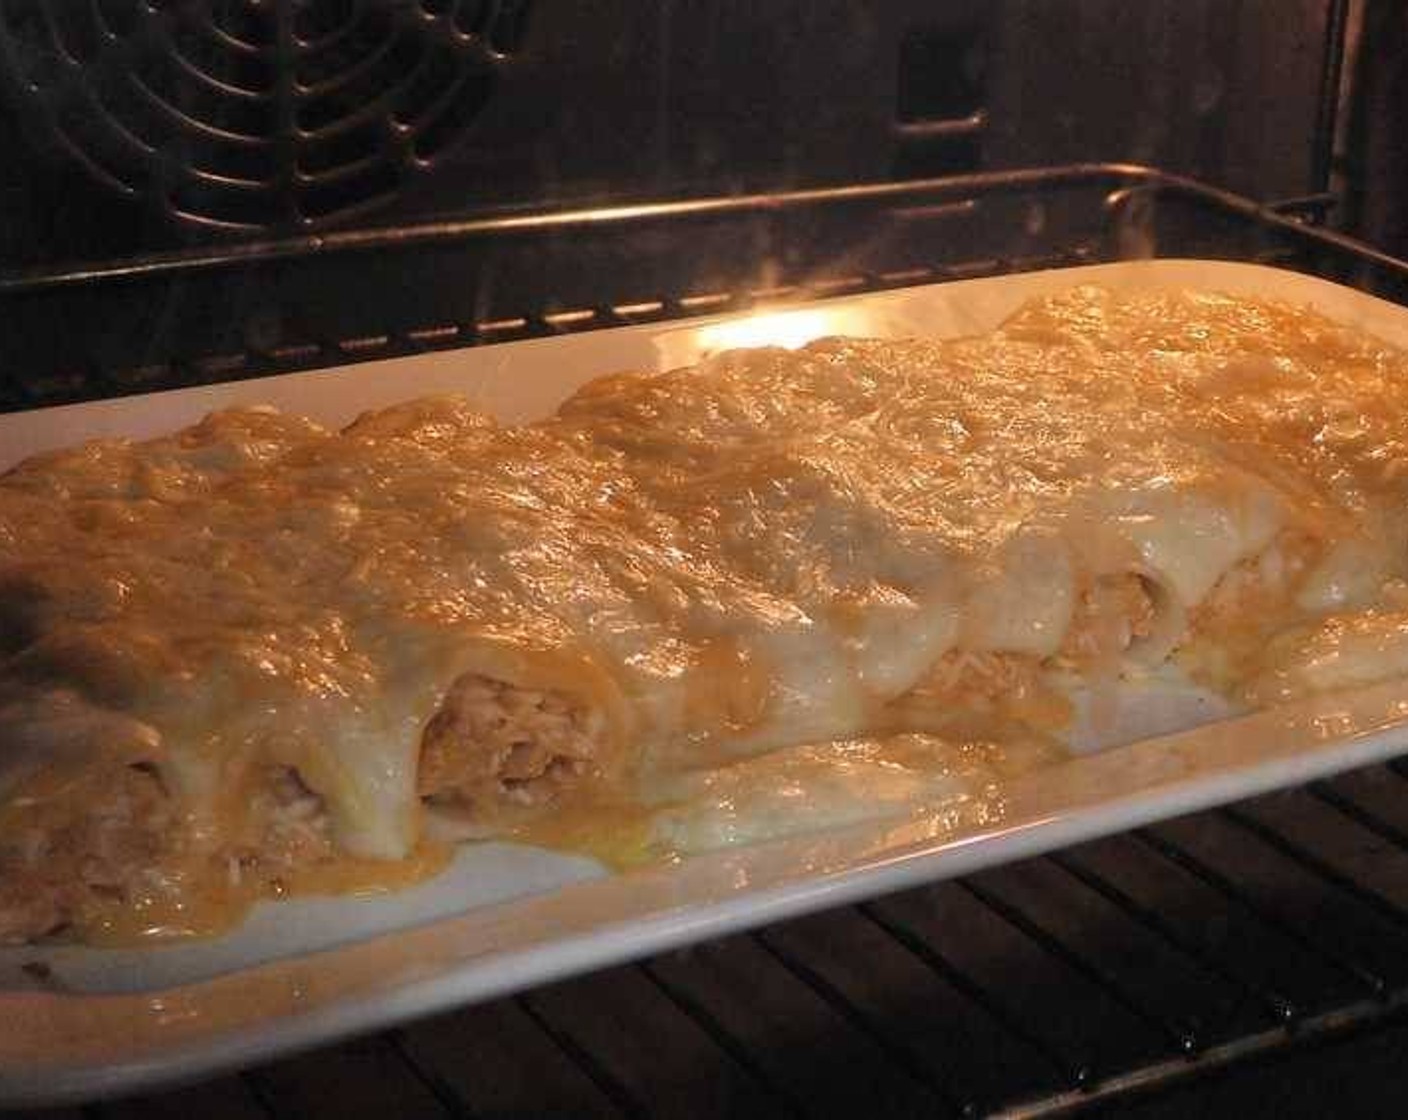 step 6 Turn on the broil setting on your oven and once heated, place the cannelloni until the cheese melts and is golden brown.